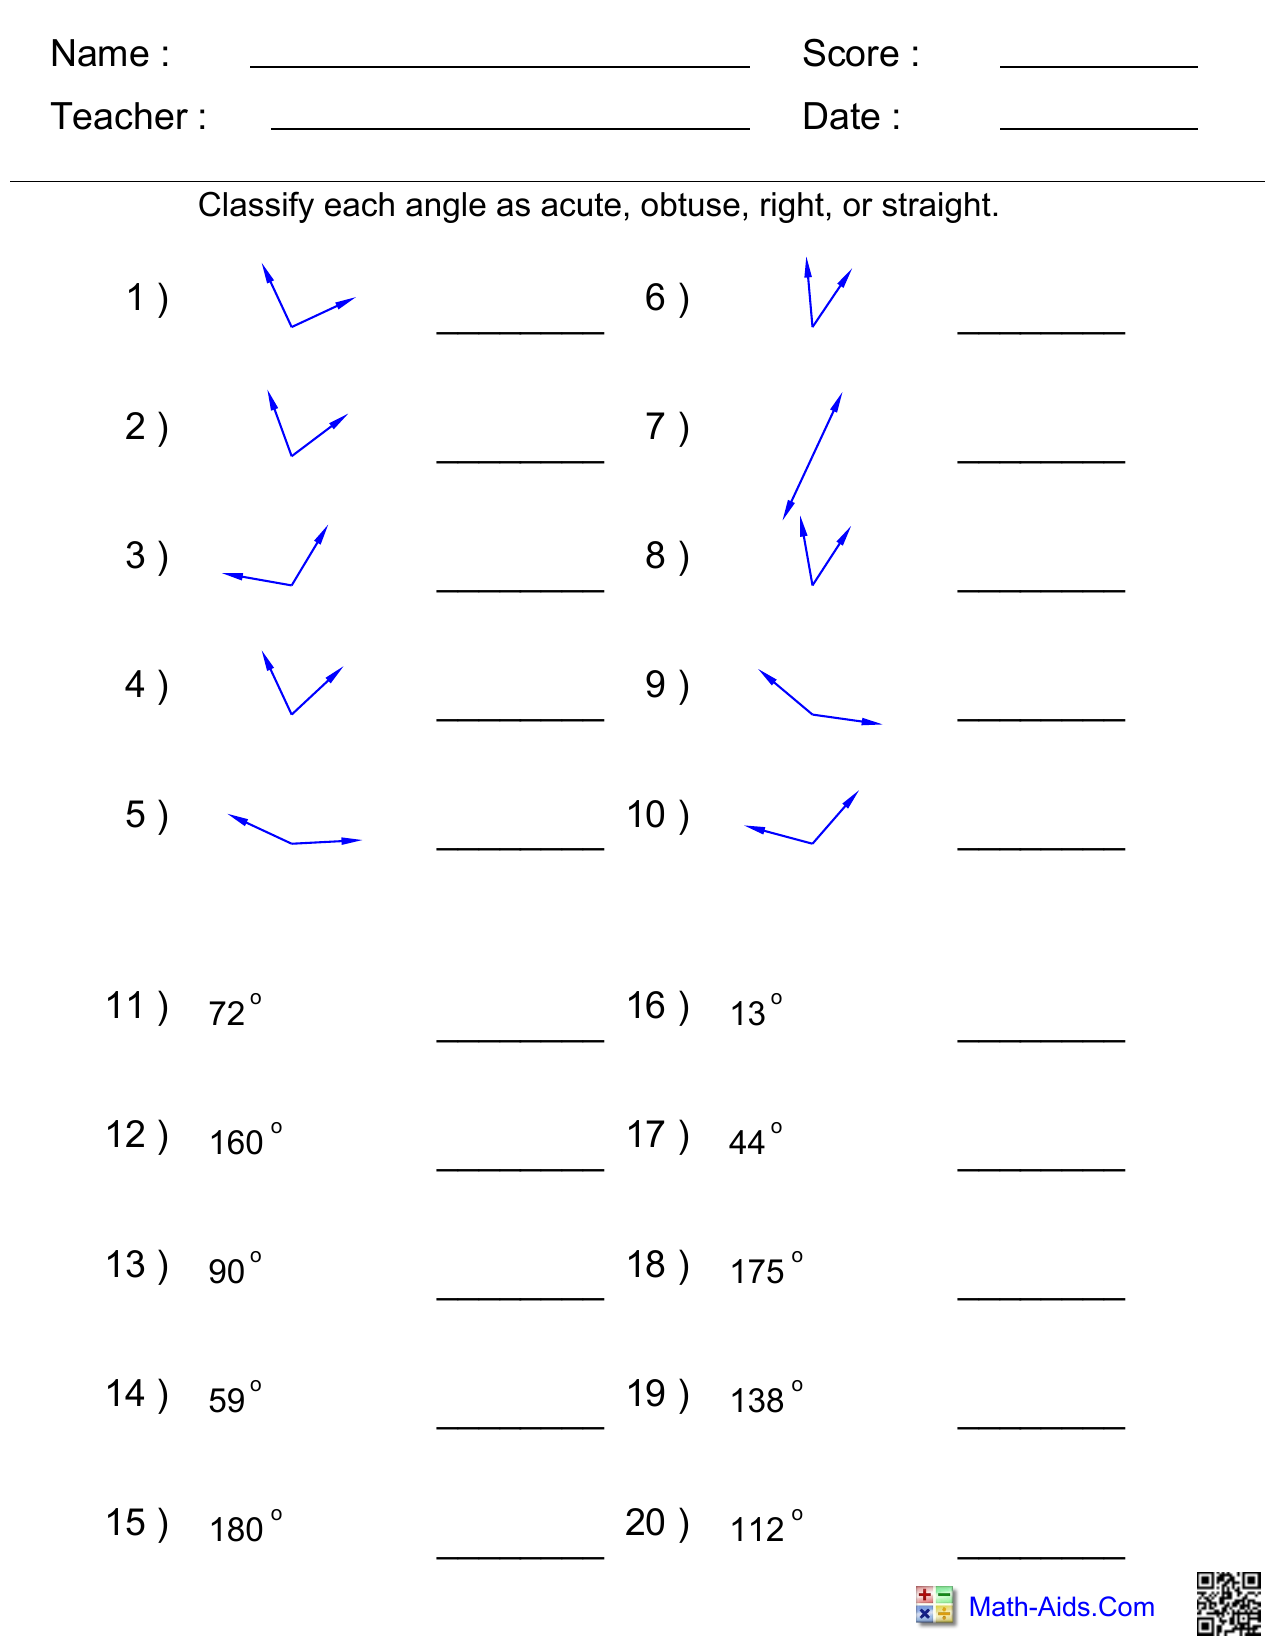 geometry-worksheets-angles-worksheets-for-practice-and-study